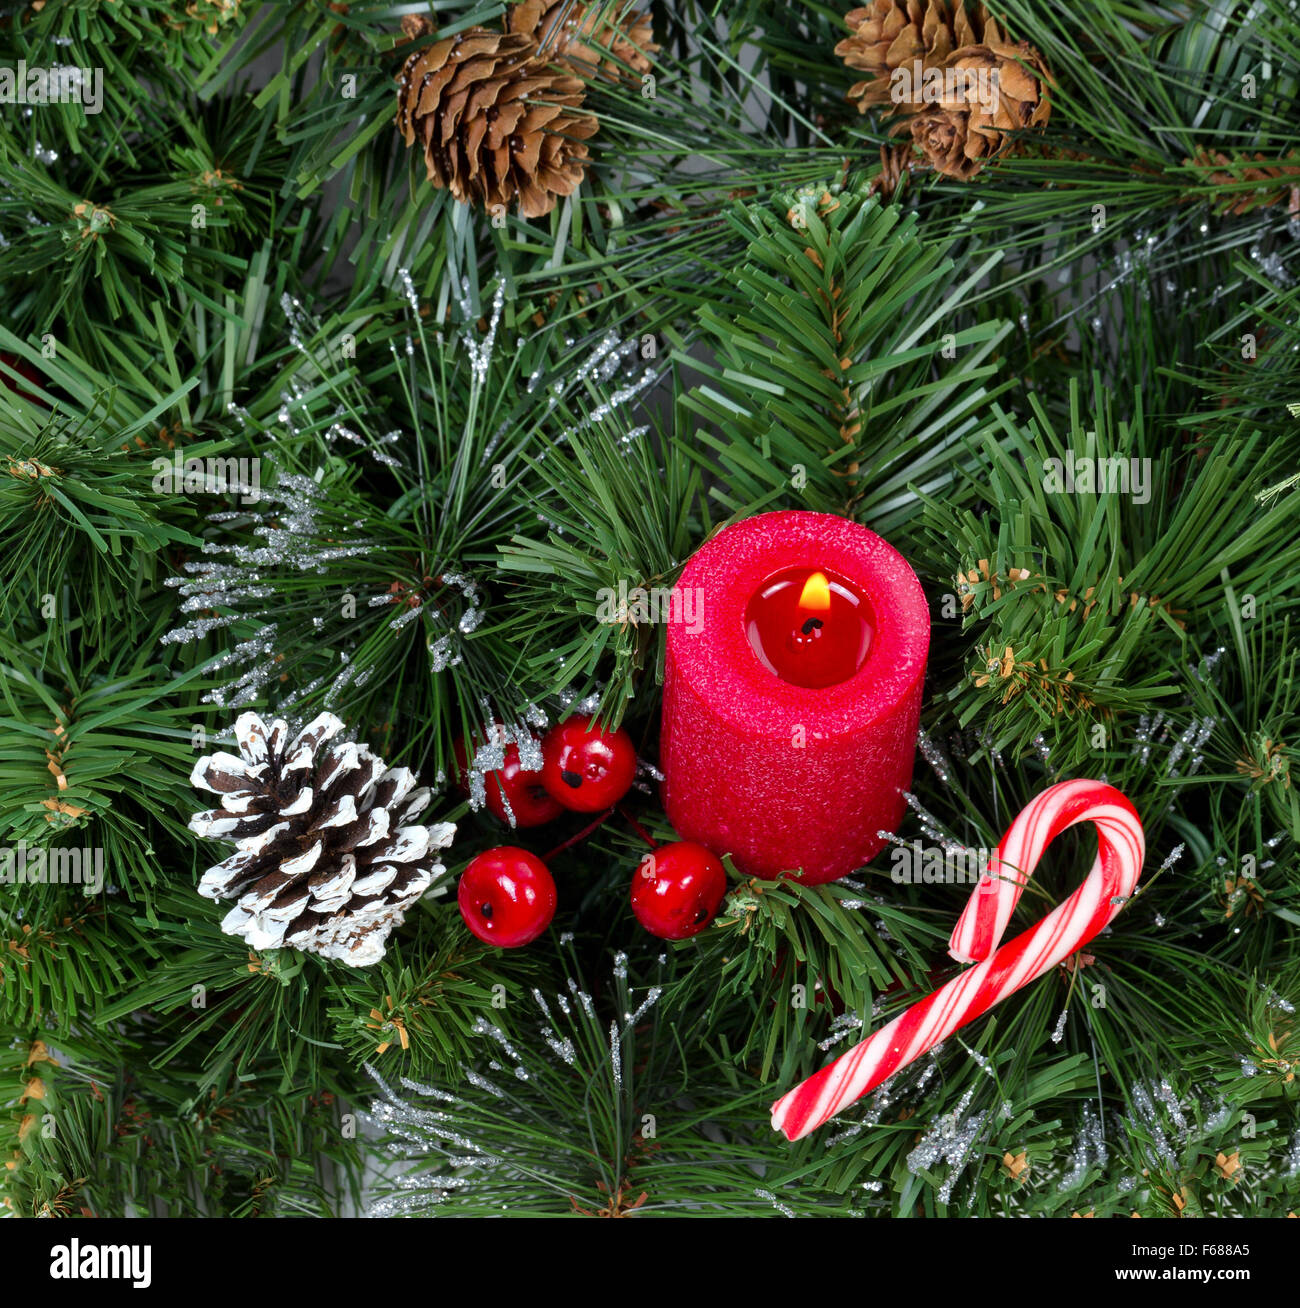 Glowing red candle and ornaments in evergreen setting. Stock Photo